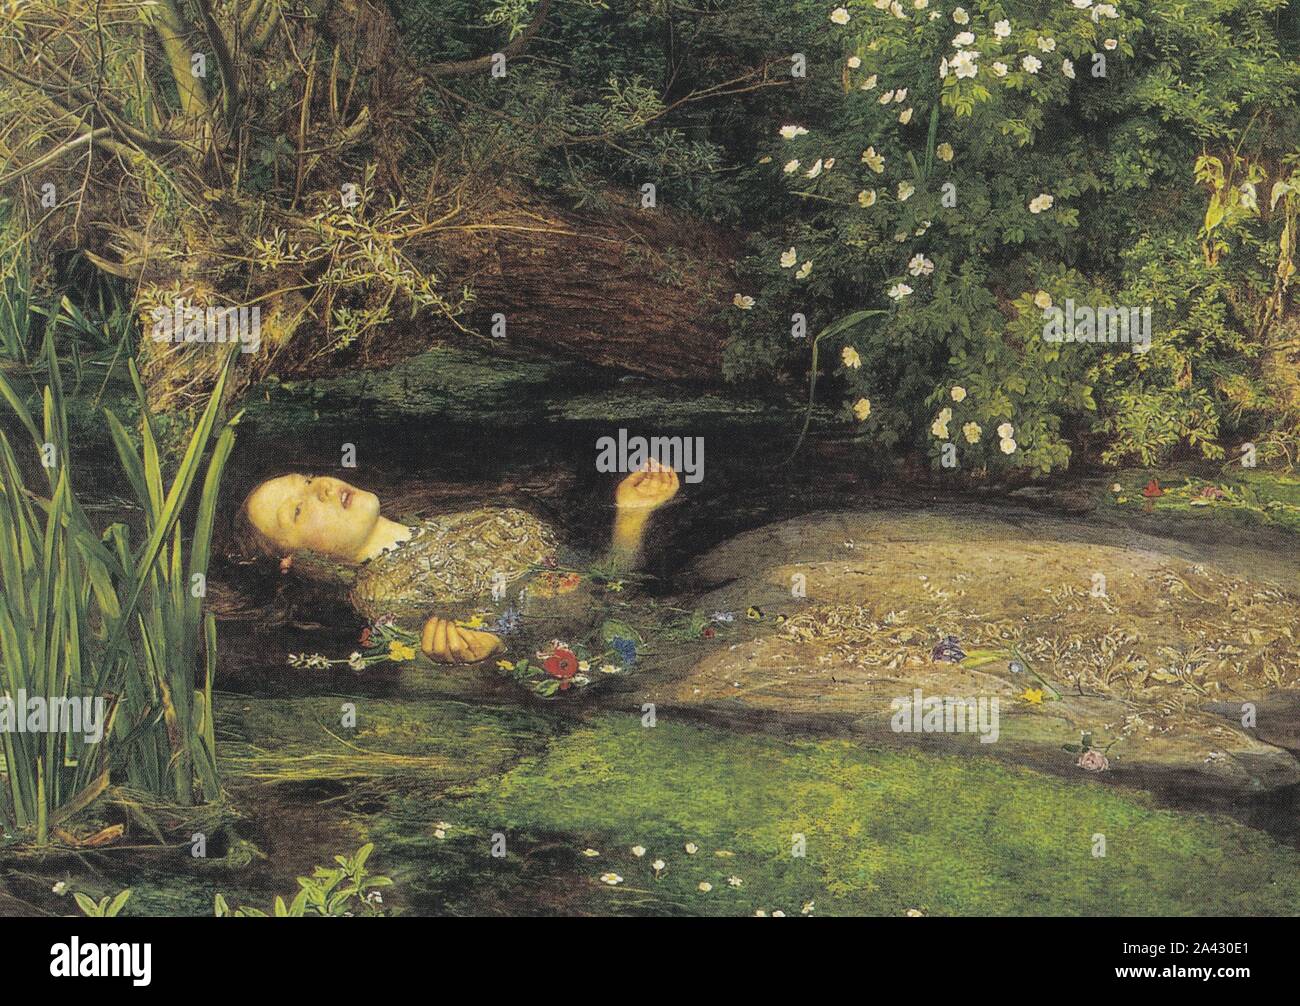 Postcard of 'Ophelia (detail) 1851 - 1852 by Sir John Everett Millais -Royal Academy of Arts. Character from William Shakespeare's play Hamlet. Stock Photo